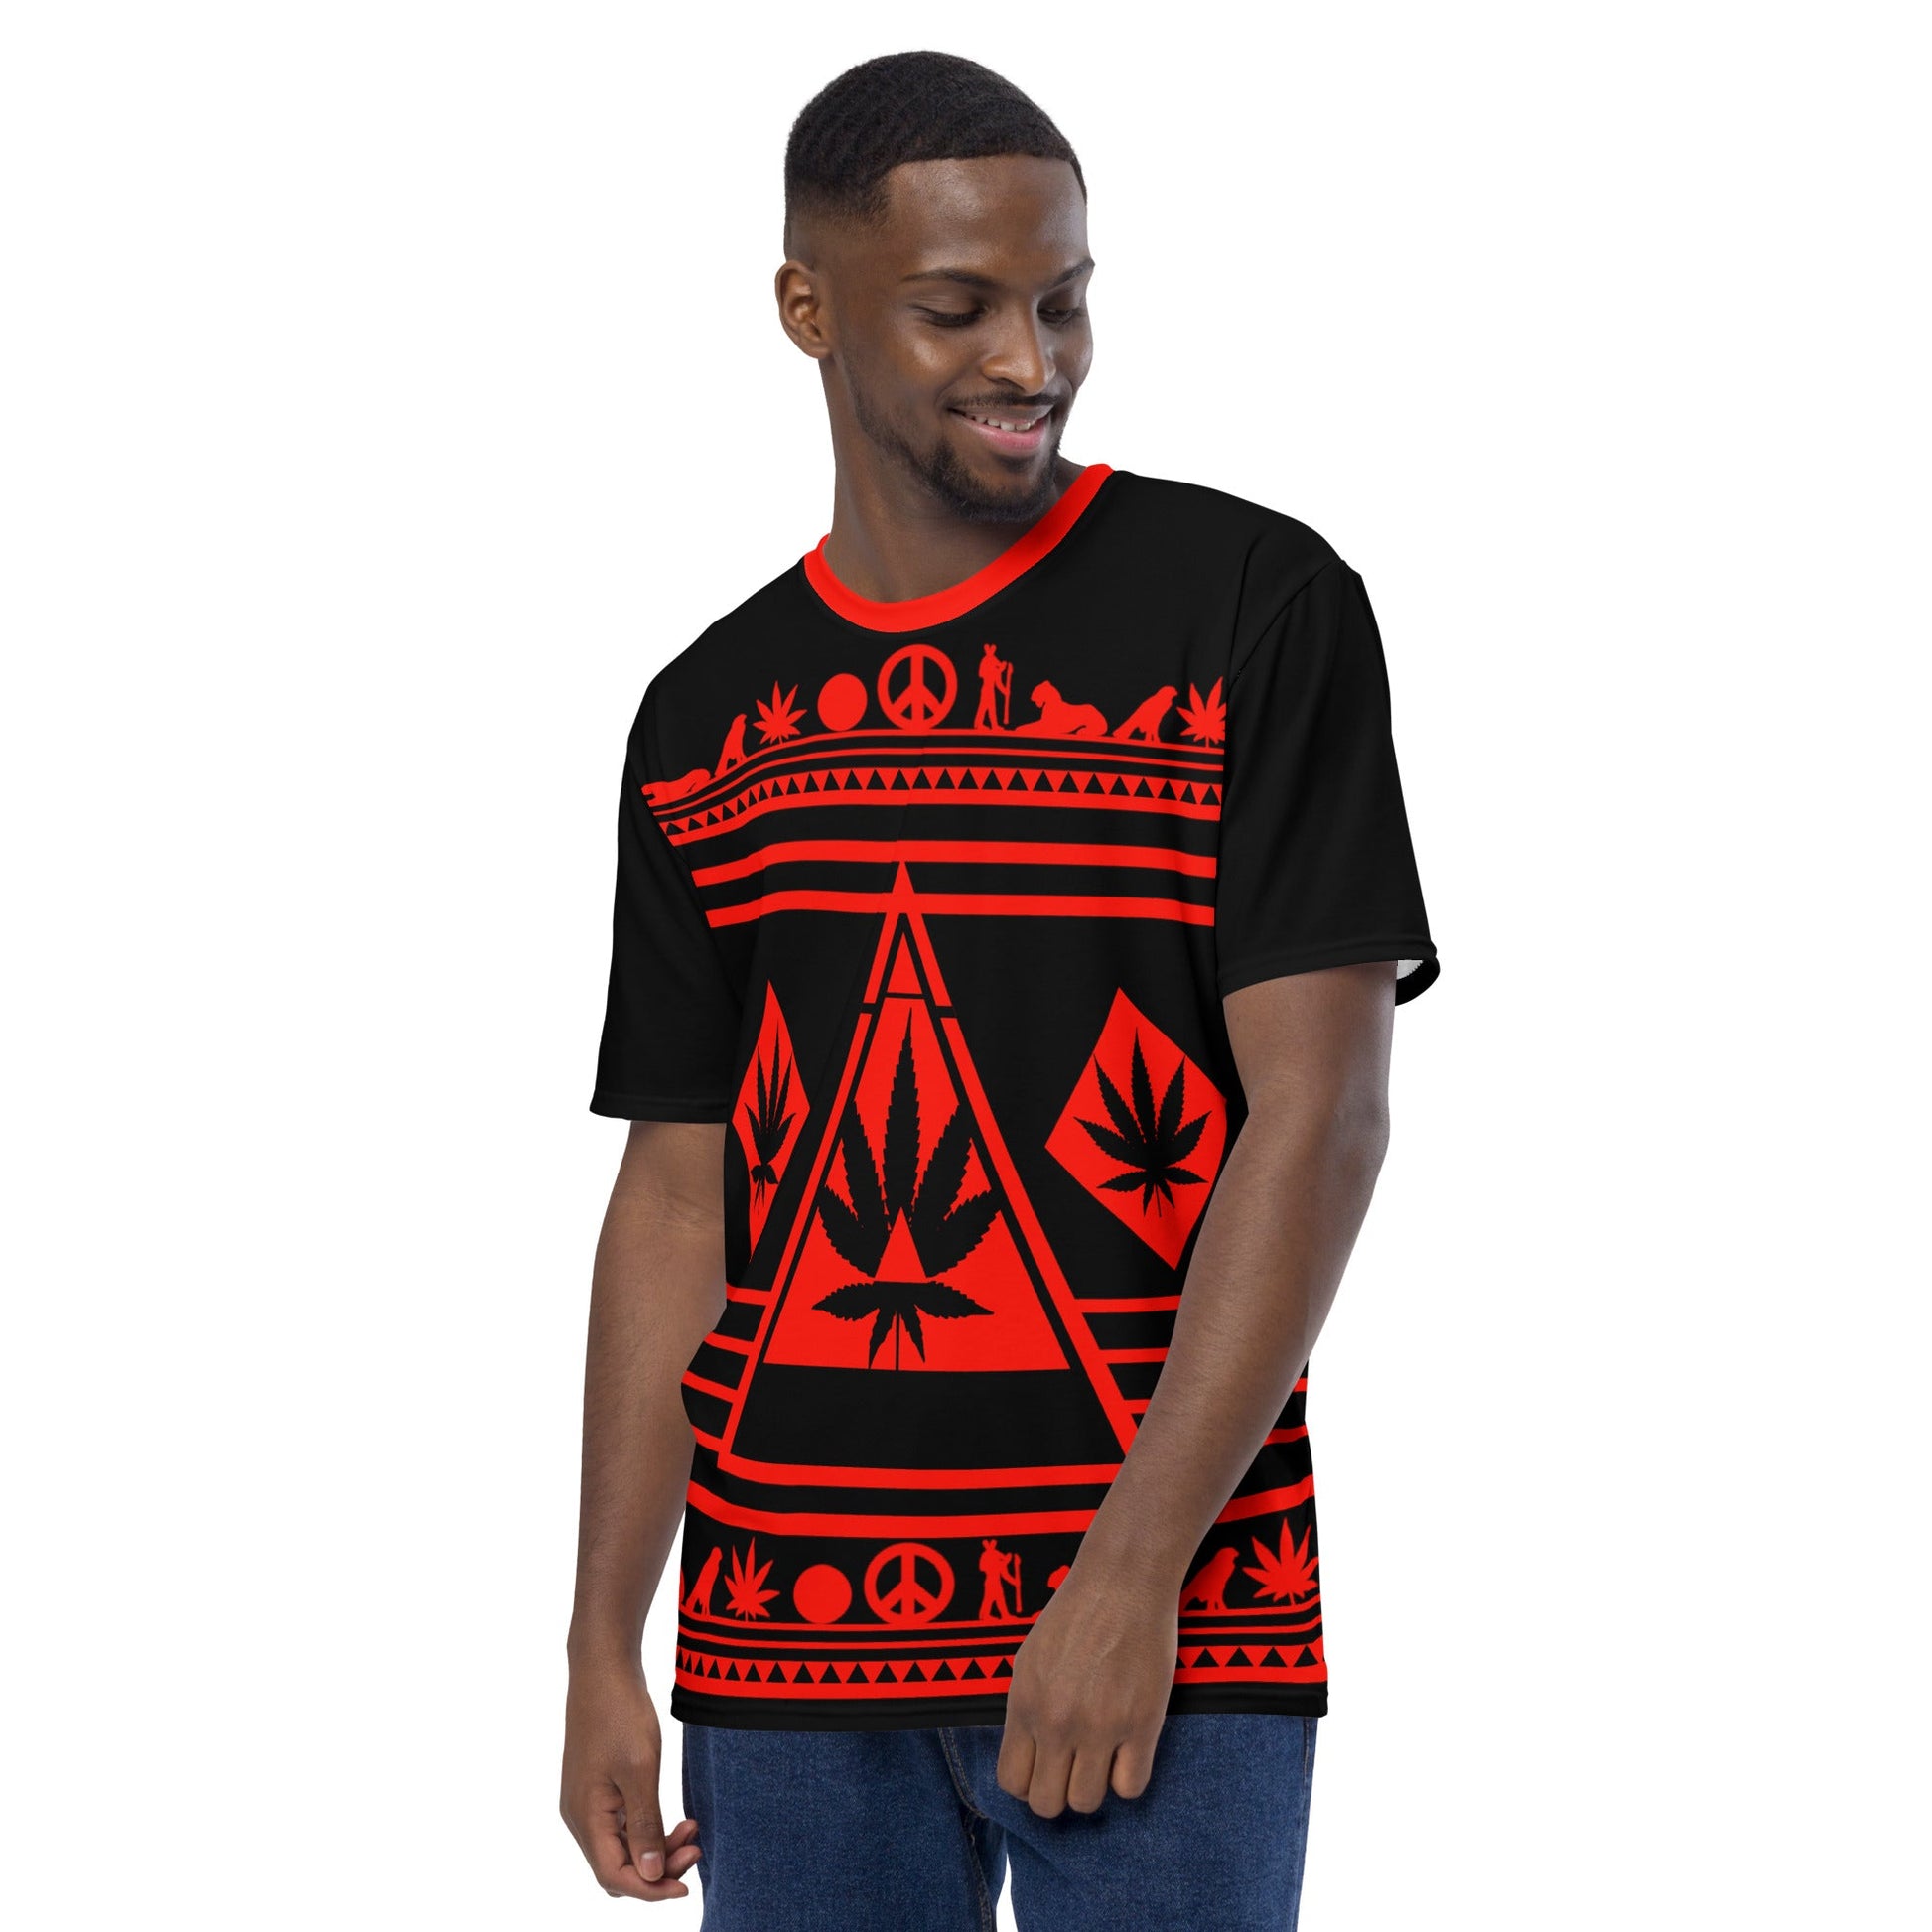 black and red pattern graphic shirt